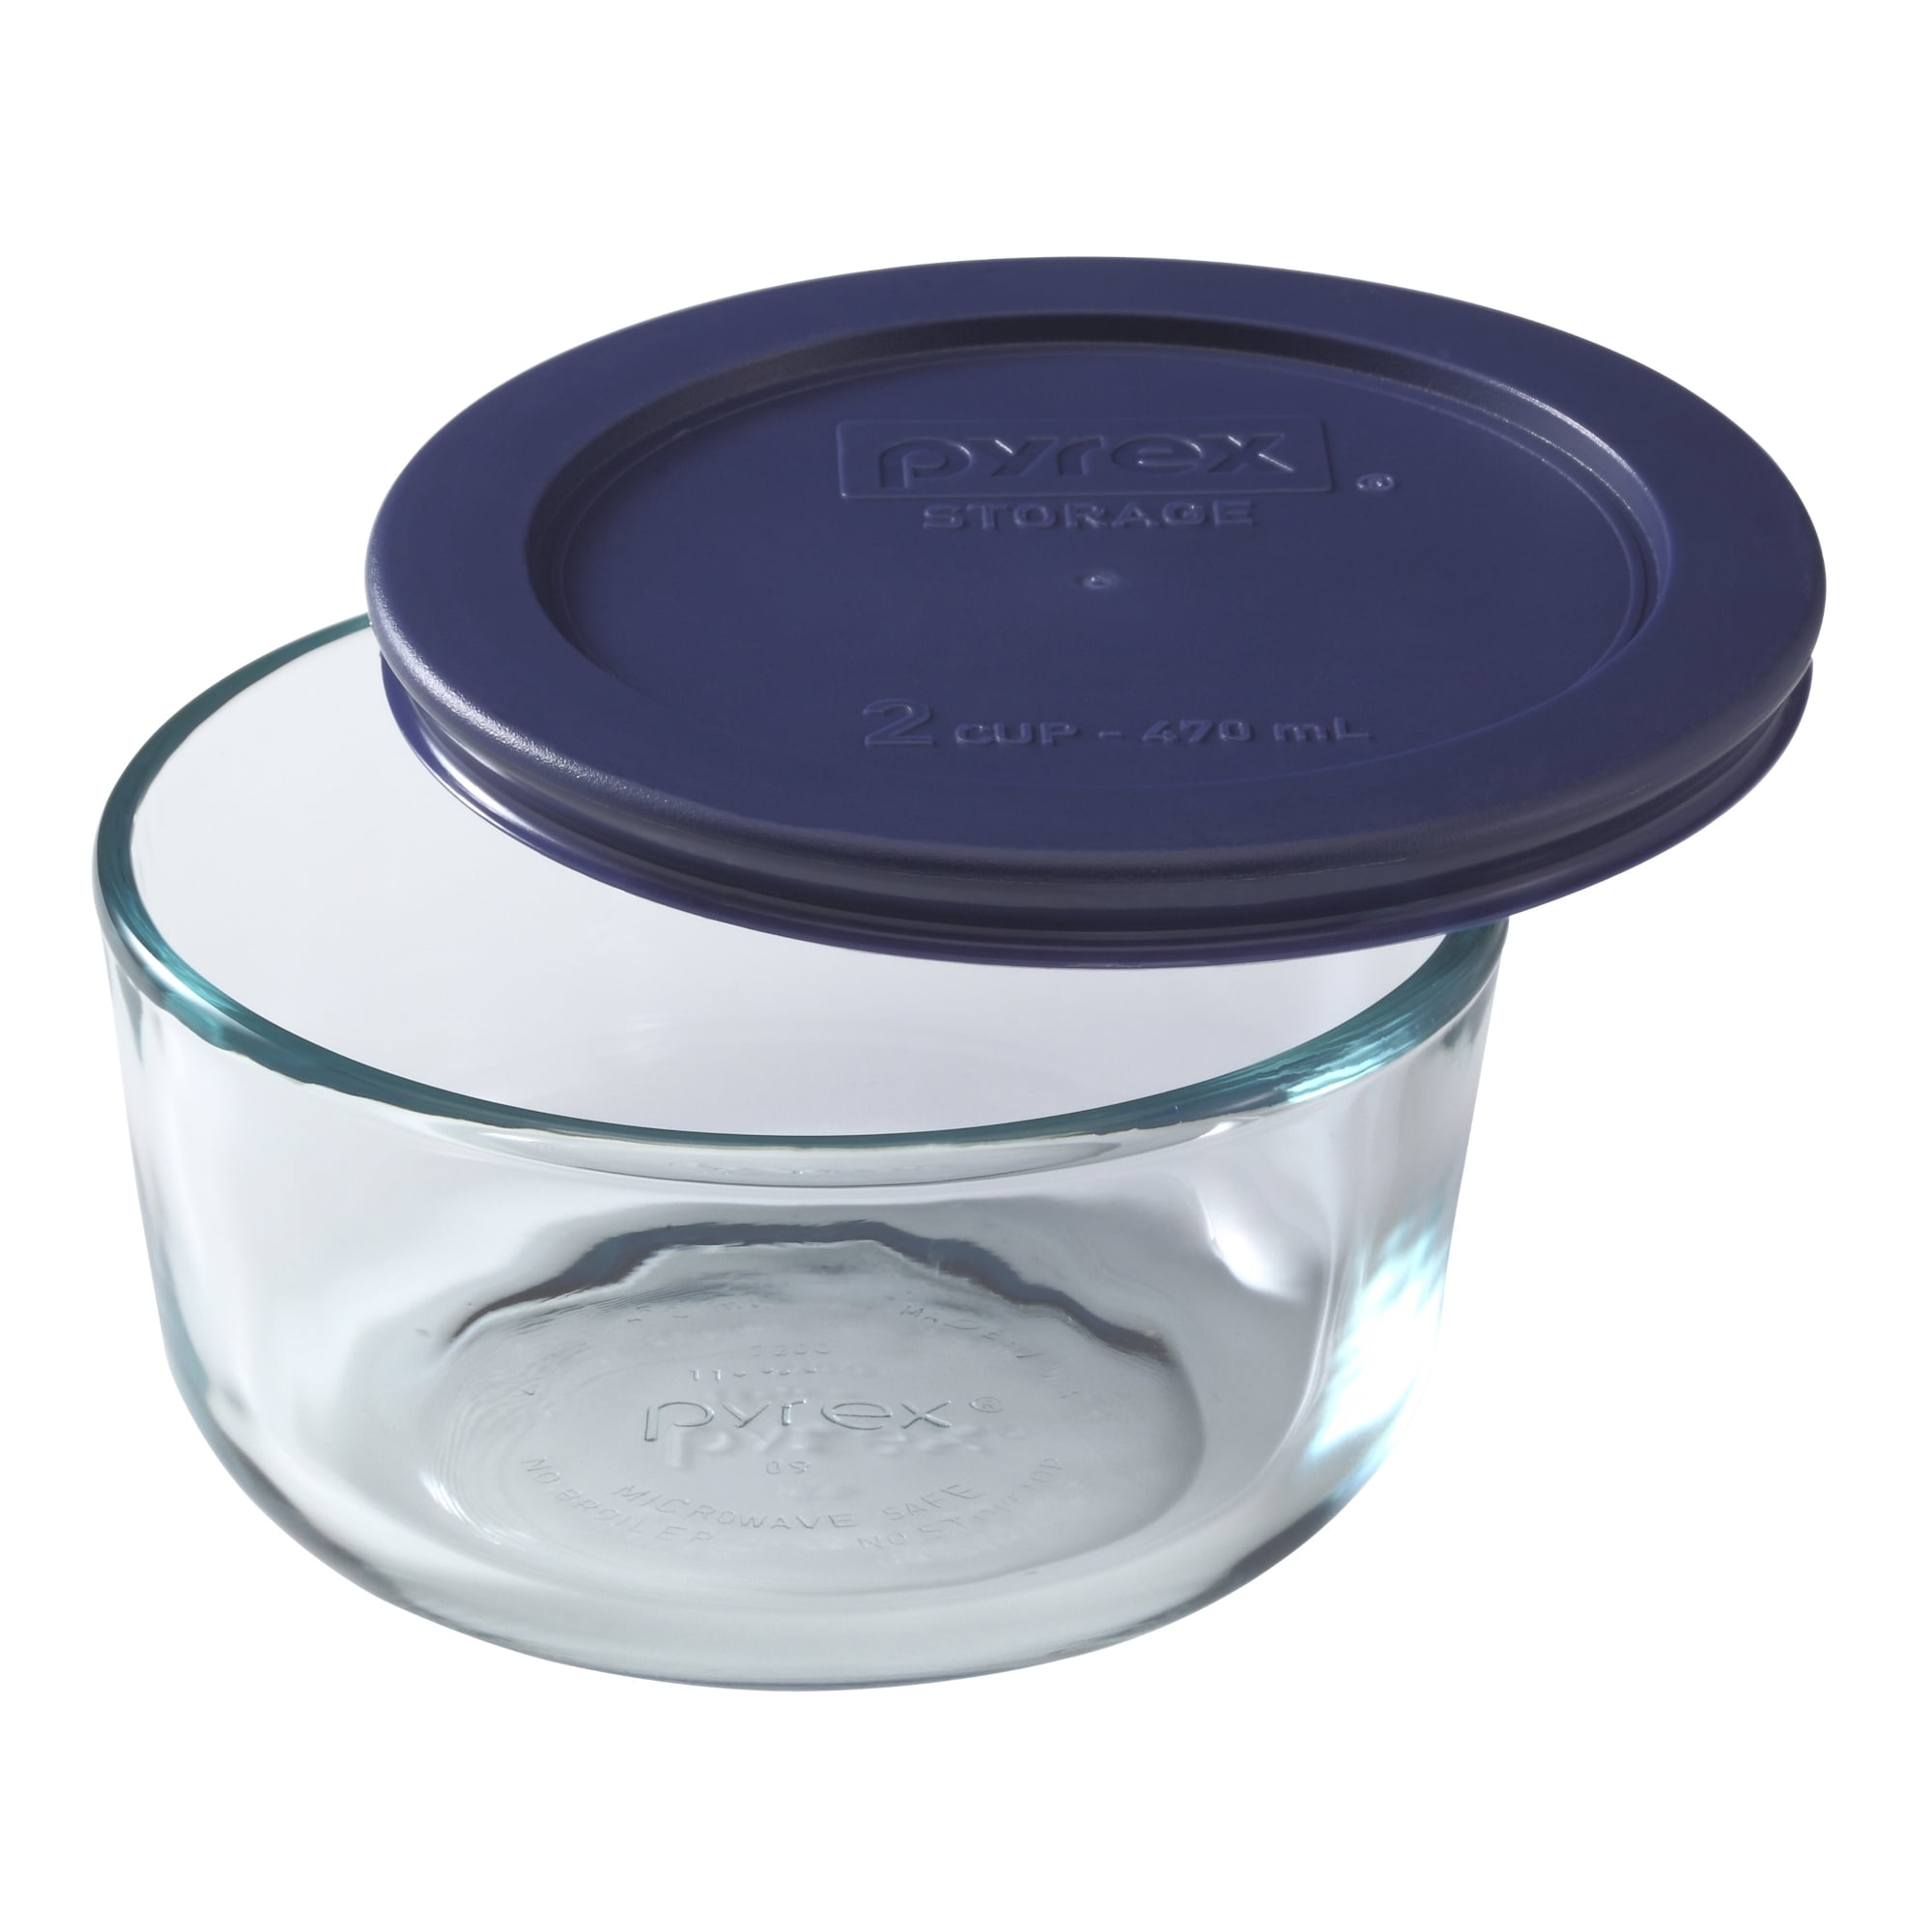 Save on Pyrex 2 Cup Order Online Delivery